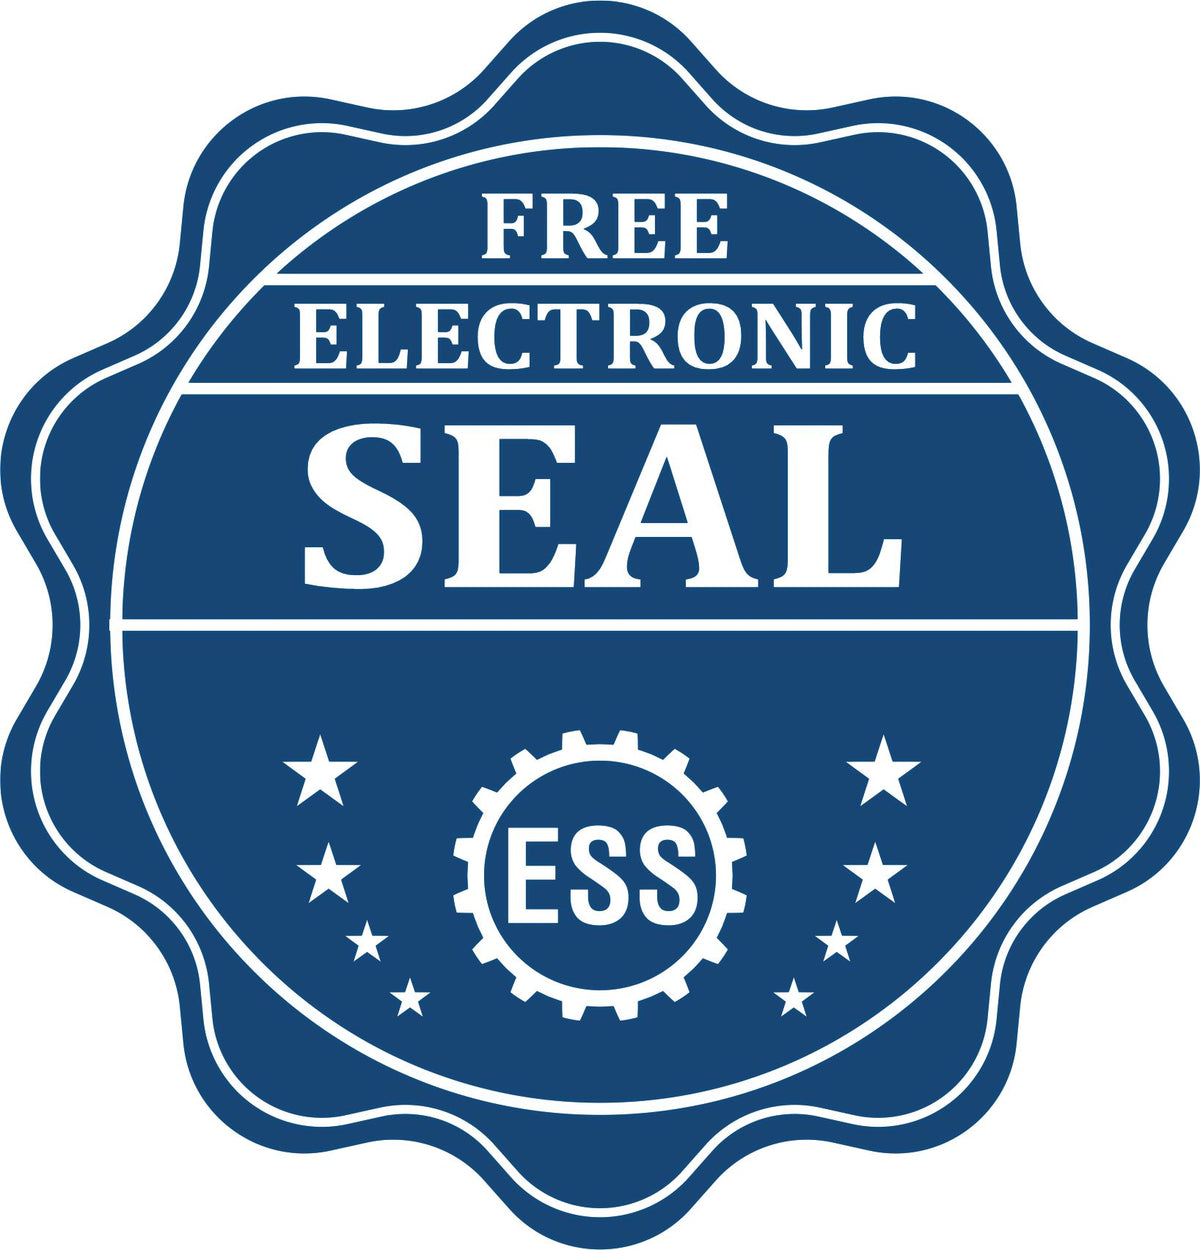 A badge showing a free electronic seal for the Kansas Desk Surveyor Seal Embosser with stars and the ESS gear on the emblem.